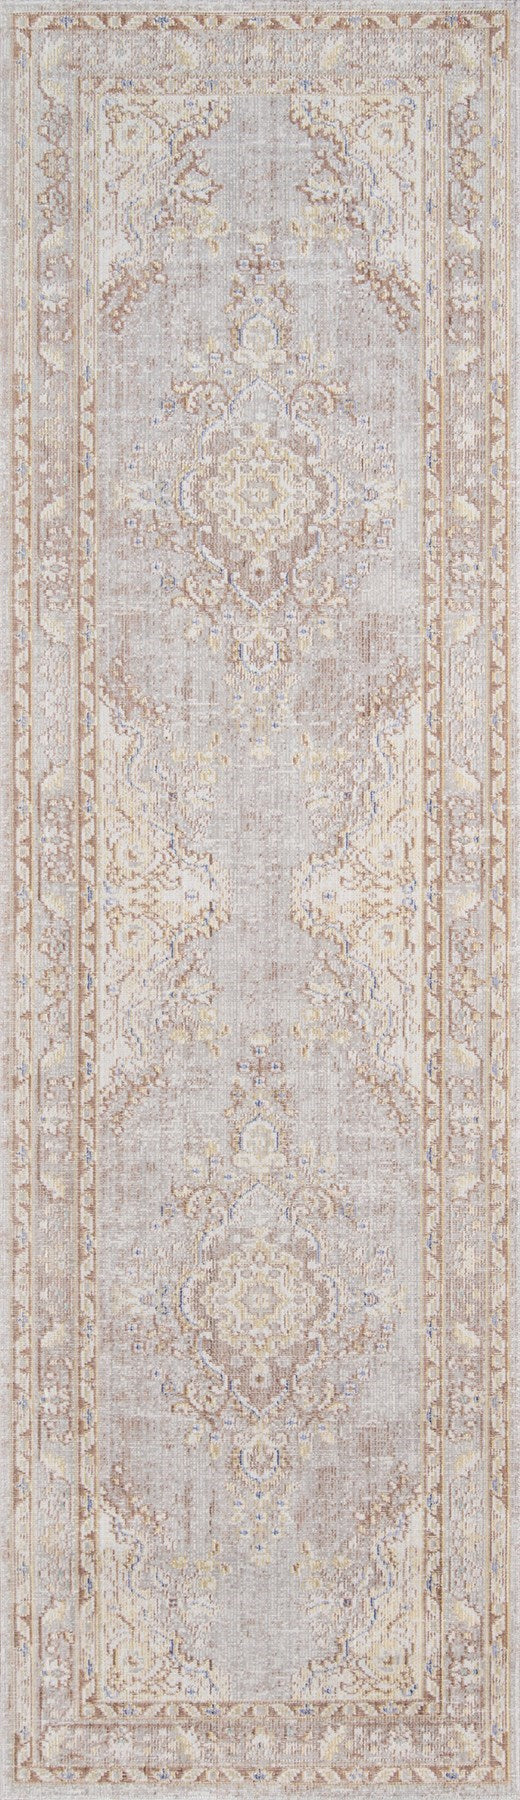 Soft Gray Vintage Style Rug